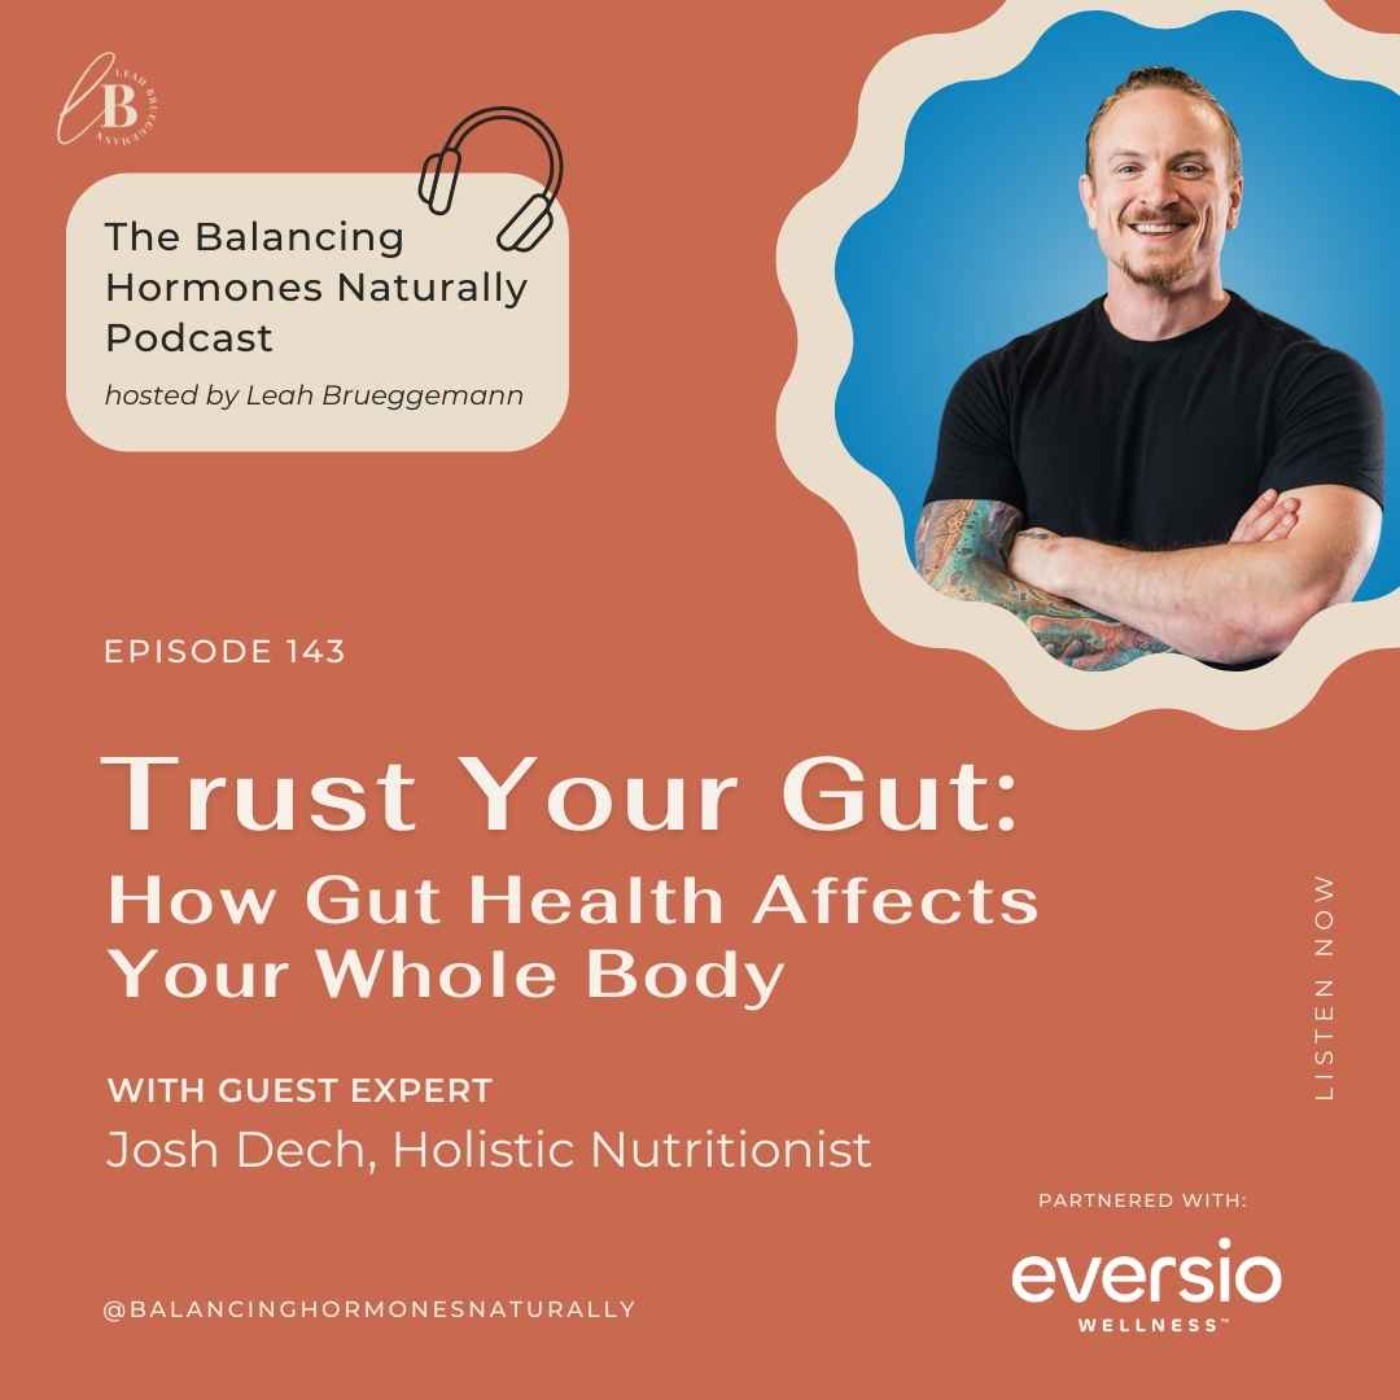 Episode 143: Trust Your Gut: How Gut Health Affects Your Whole Body